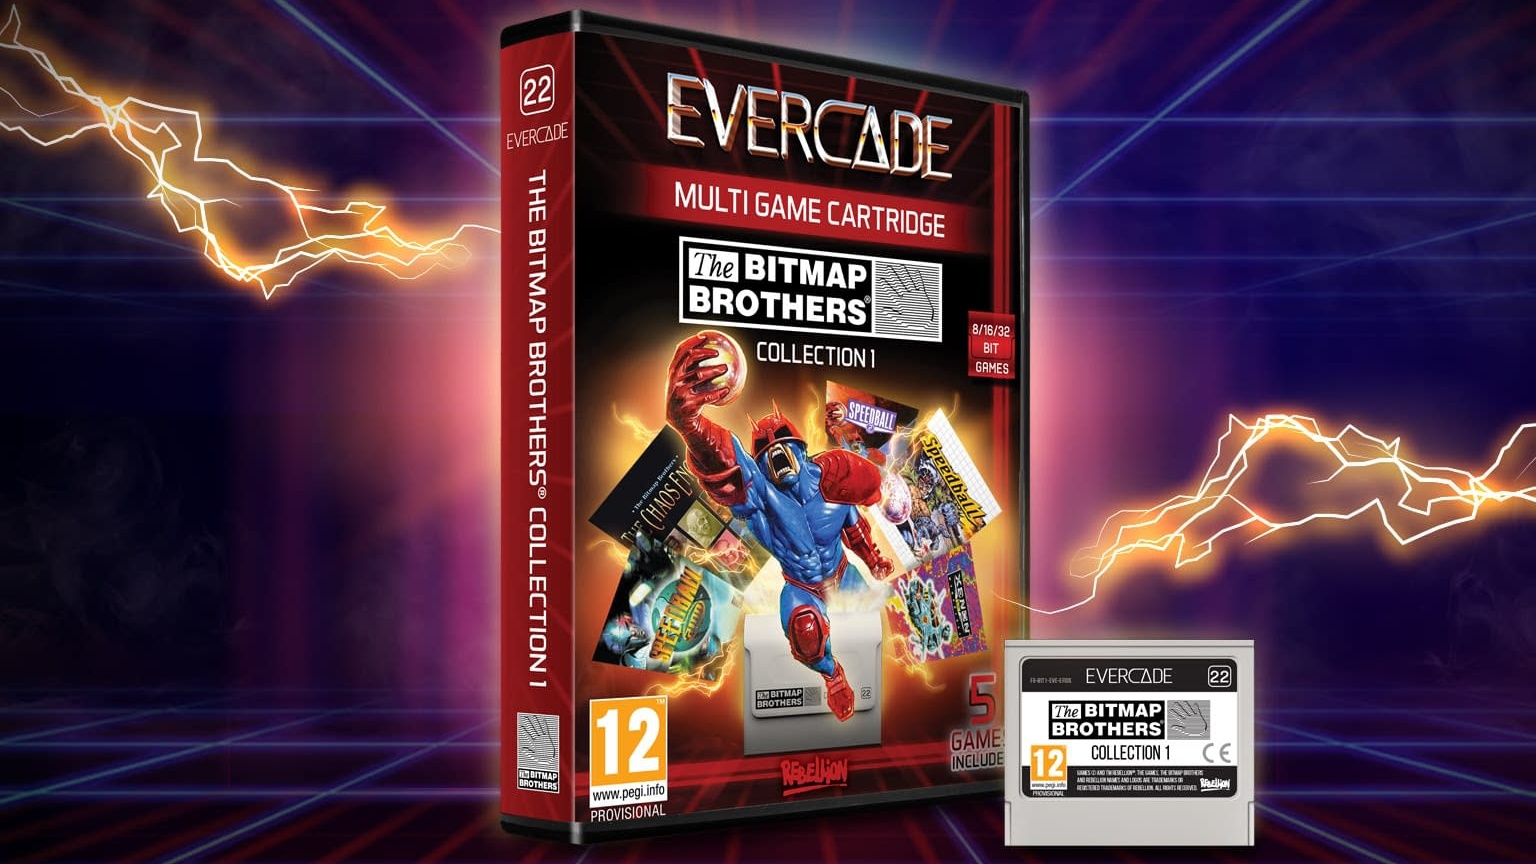 Bitmap Brothers collection coming to Evercade